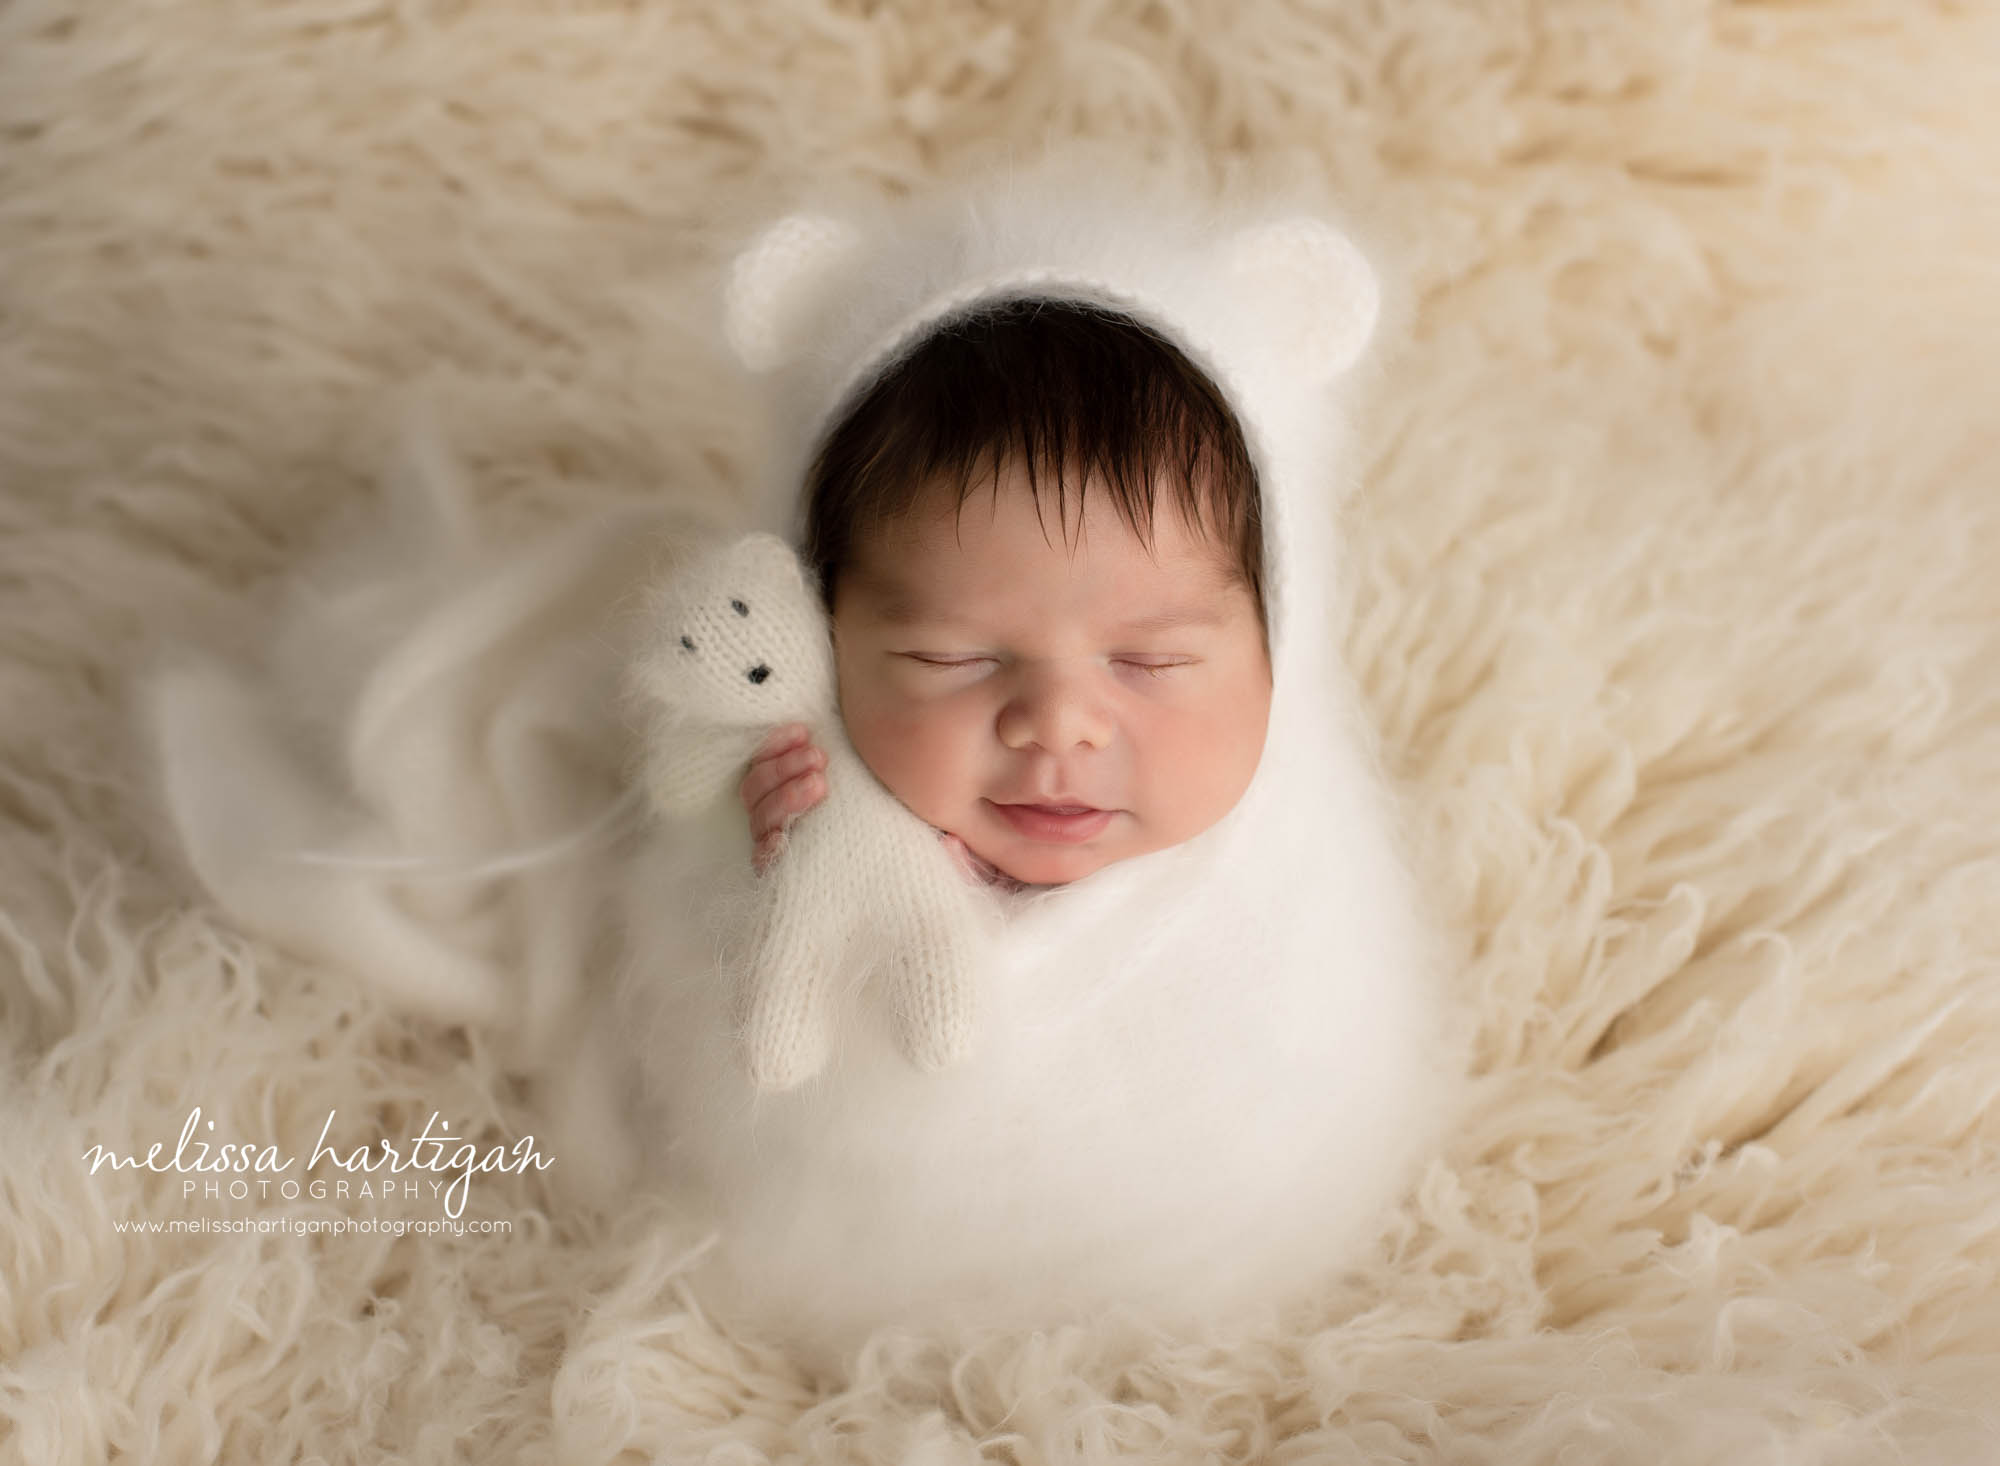 newborn baby boy wrapped in white cream knitted wrap wearing matching bonnet and holding knitted teddy bear smirk smiling CT newborn photographer